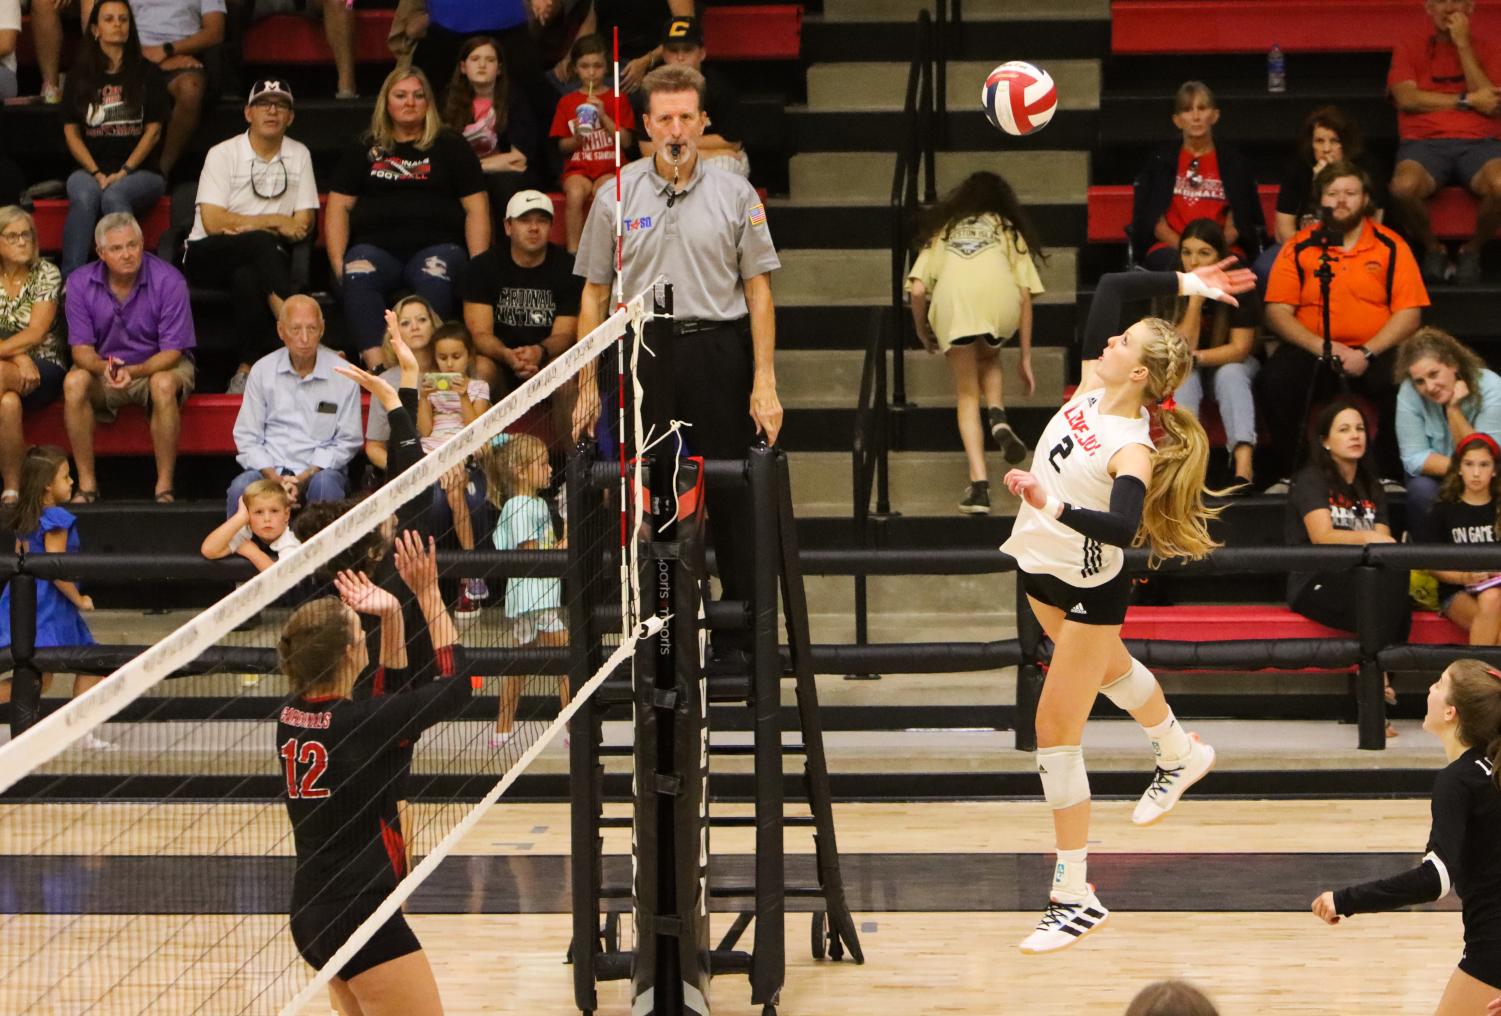 Sophomore no.2 Shelby Burriss jumps up for a spike. The Leopards had a total of 47 kills throughout the game against Melissa.